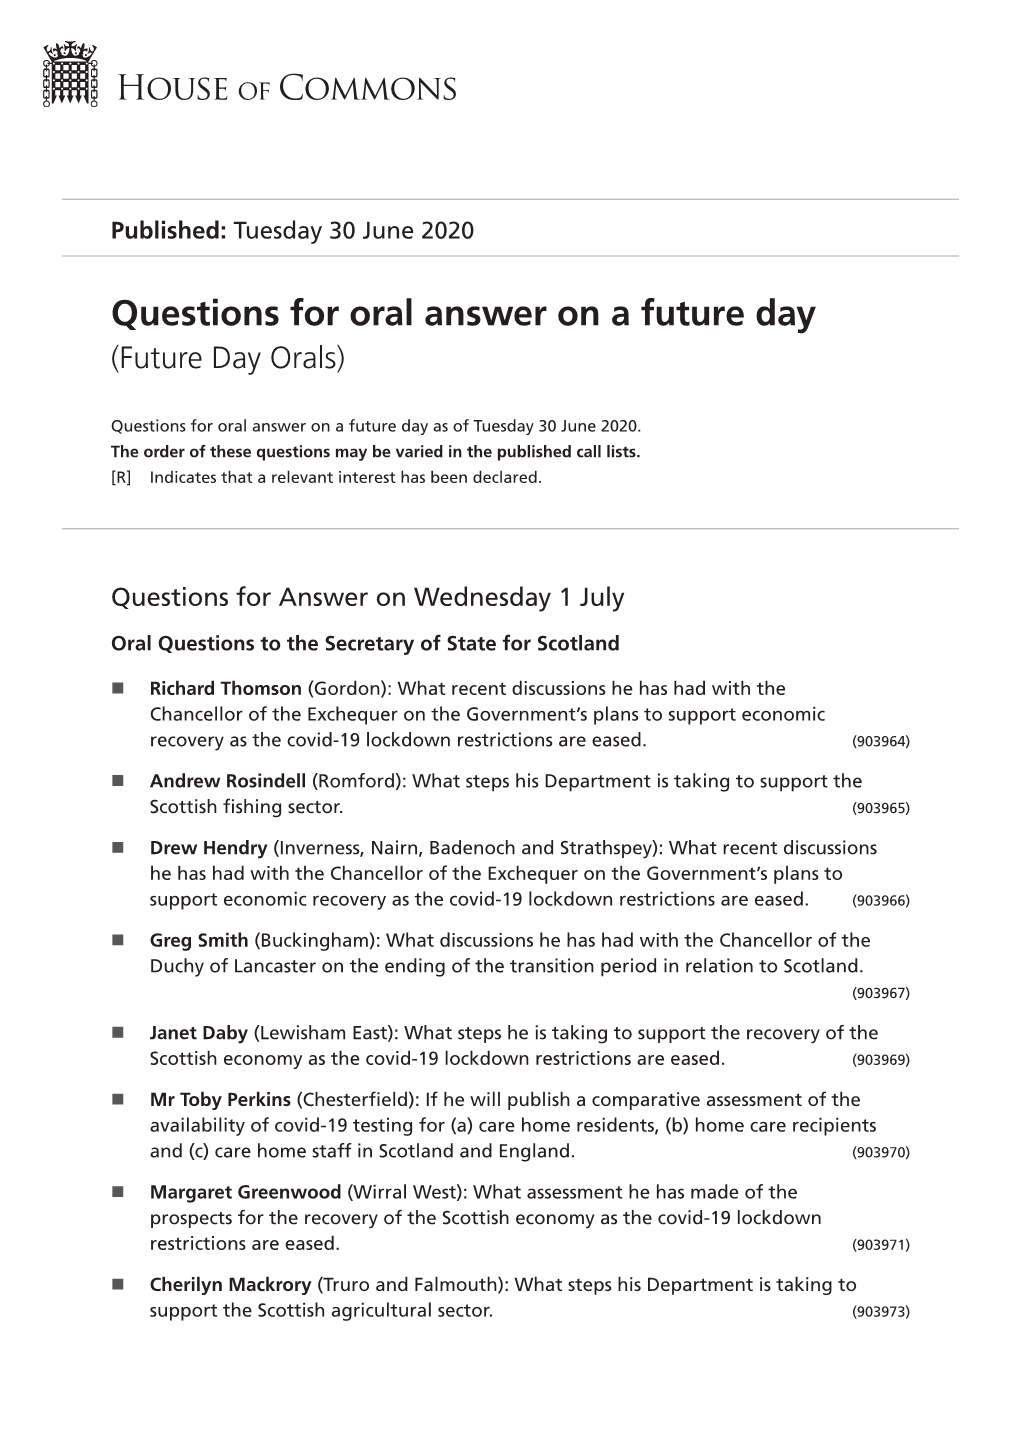 Future Oral Questions As of Tue 30 Jun 2020